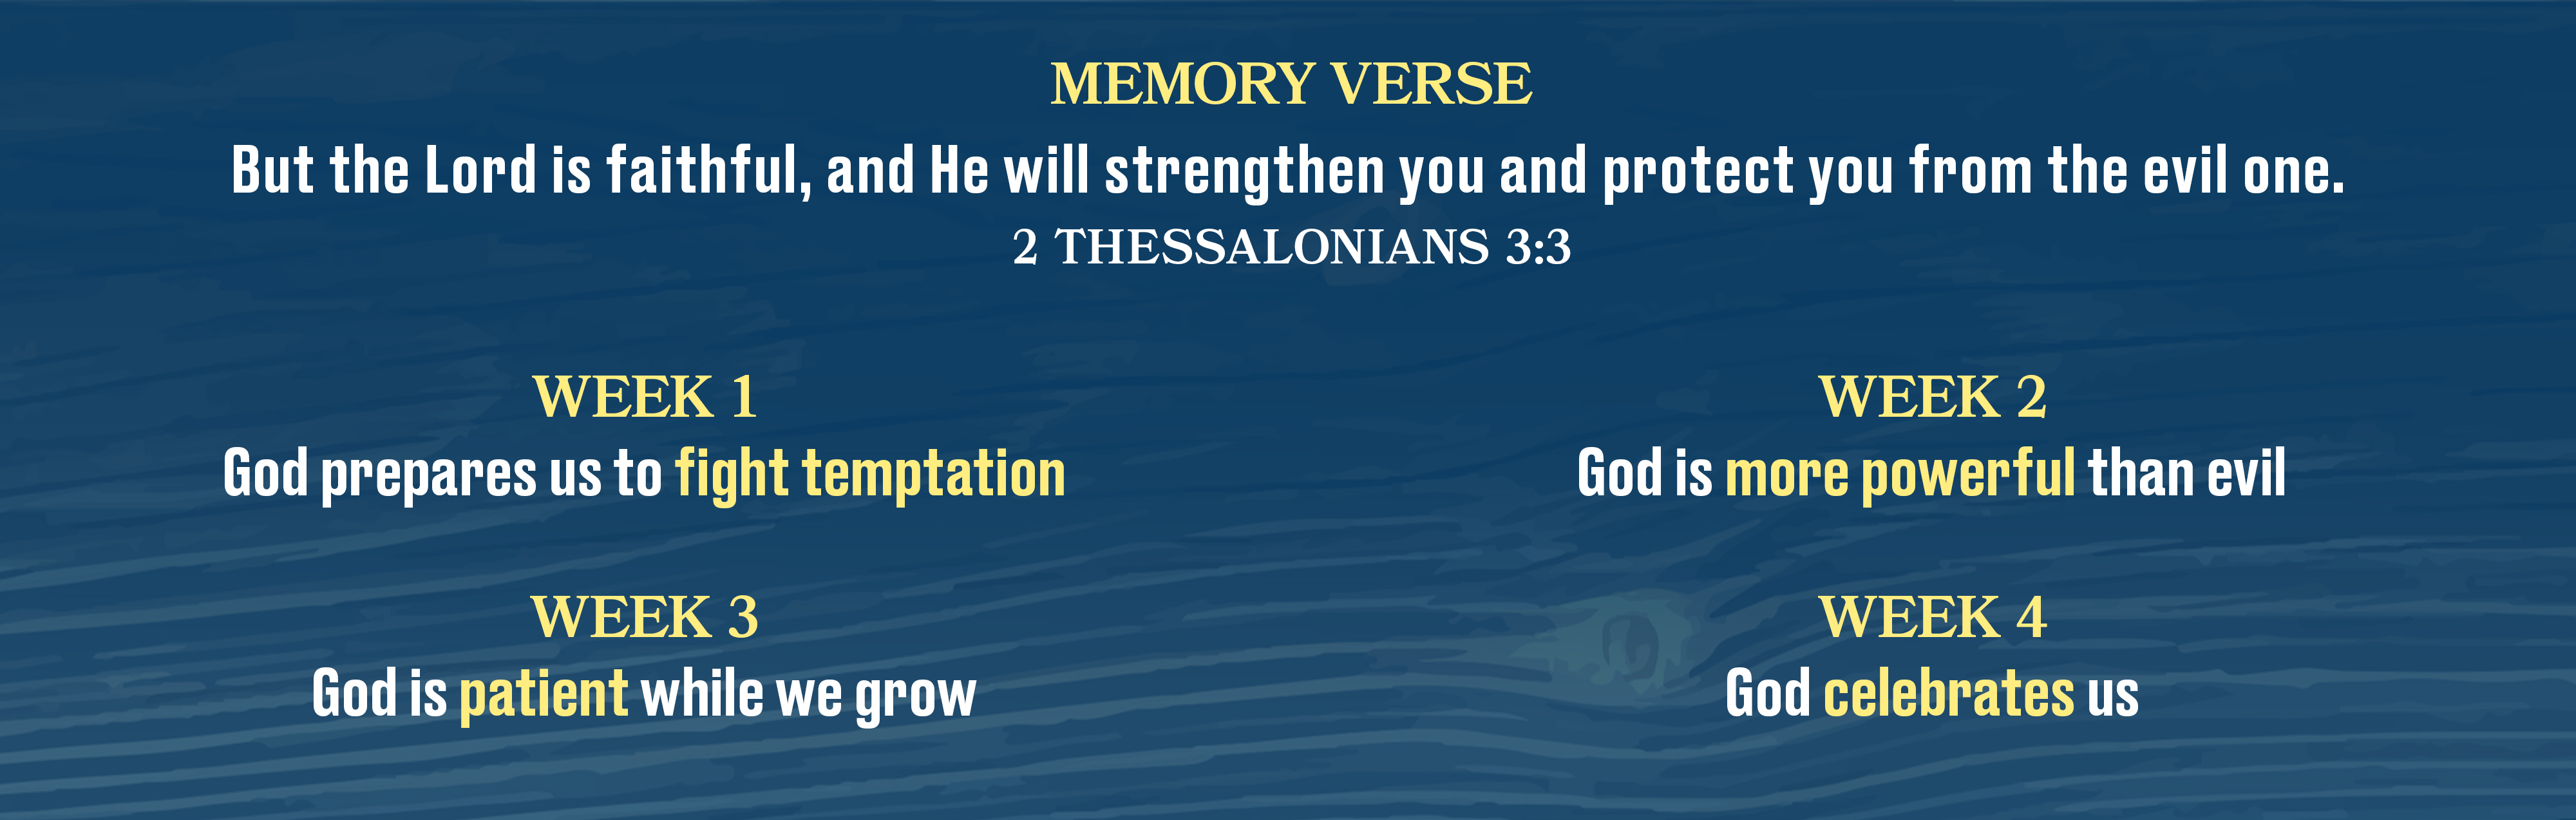 Memory Verse: But the Lord is faithful, and He will strengthen you and protect you from the evil one. - 2 Thessalonians 3:3
            Week 1: God prepares us to fight temptation. Week 2: God is more powerful than evil. Week 3: God is patient while we grow. Week 4: God celebrates us.